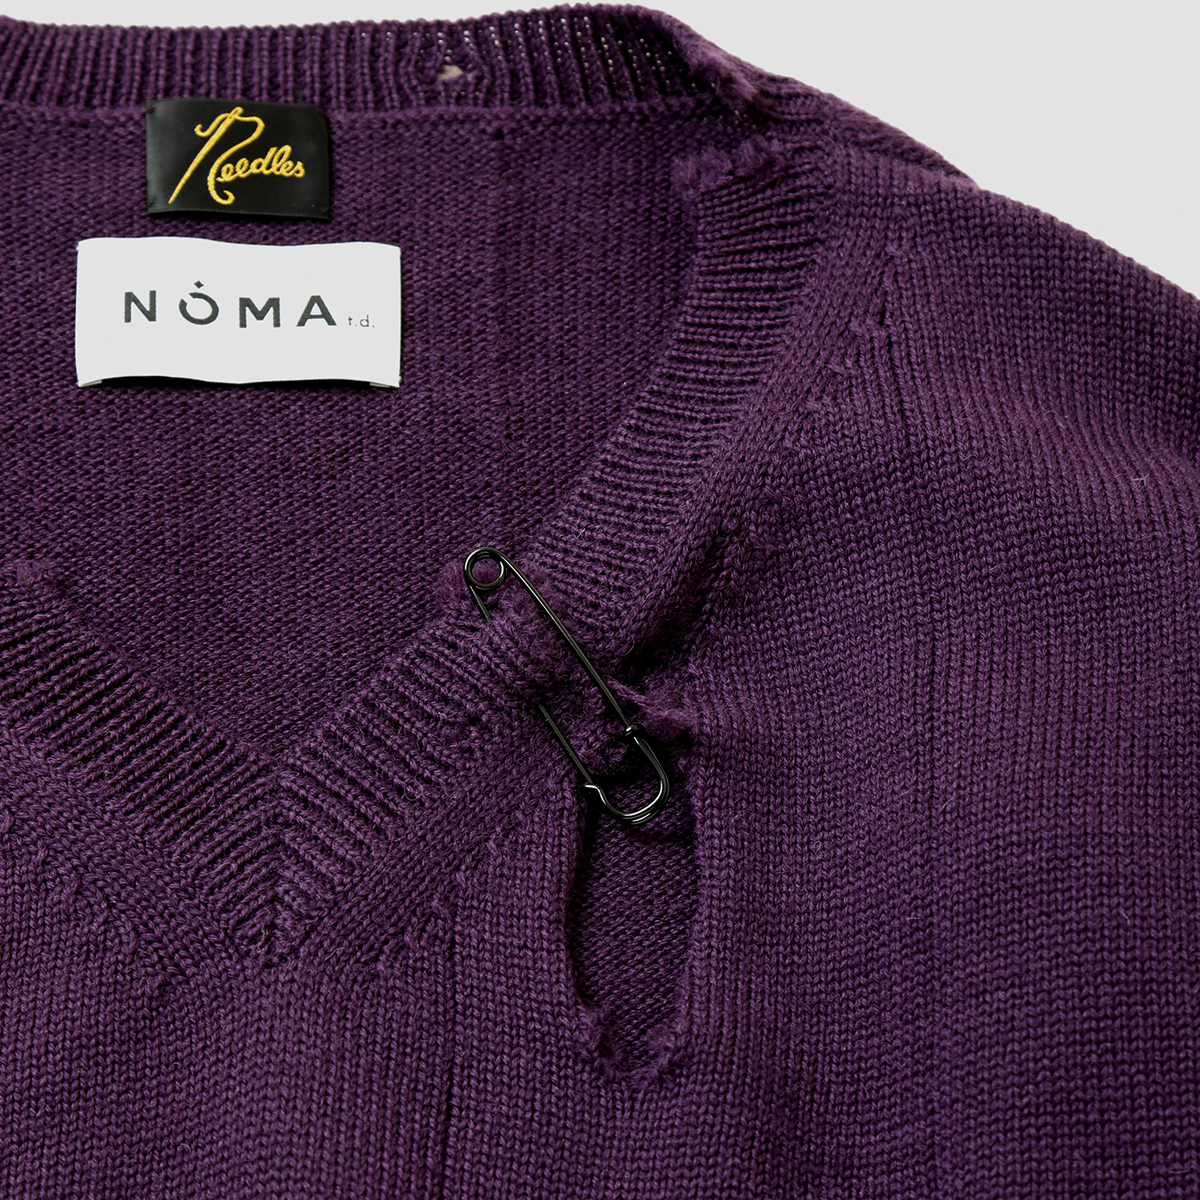 〈NEEDLES〉 x 〈NOMA t.d.〉2021 FALL WINTER COLLECTION